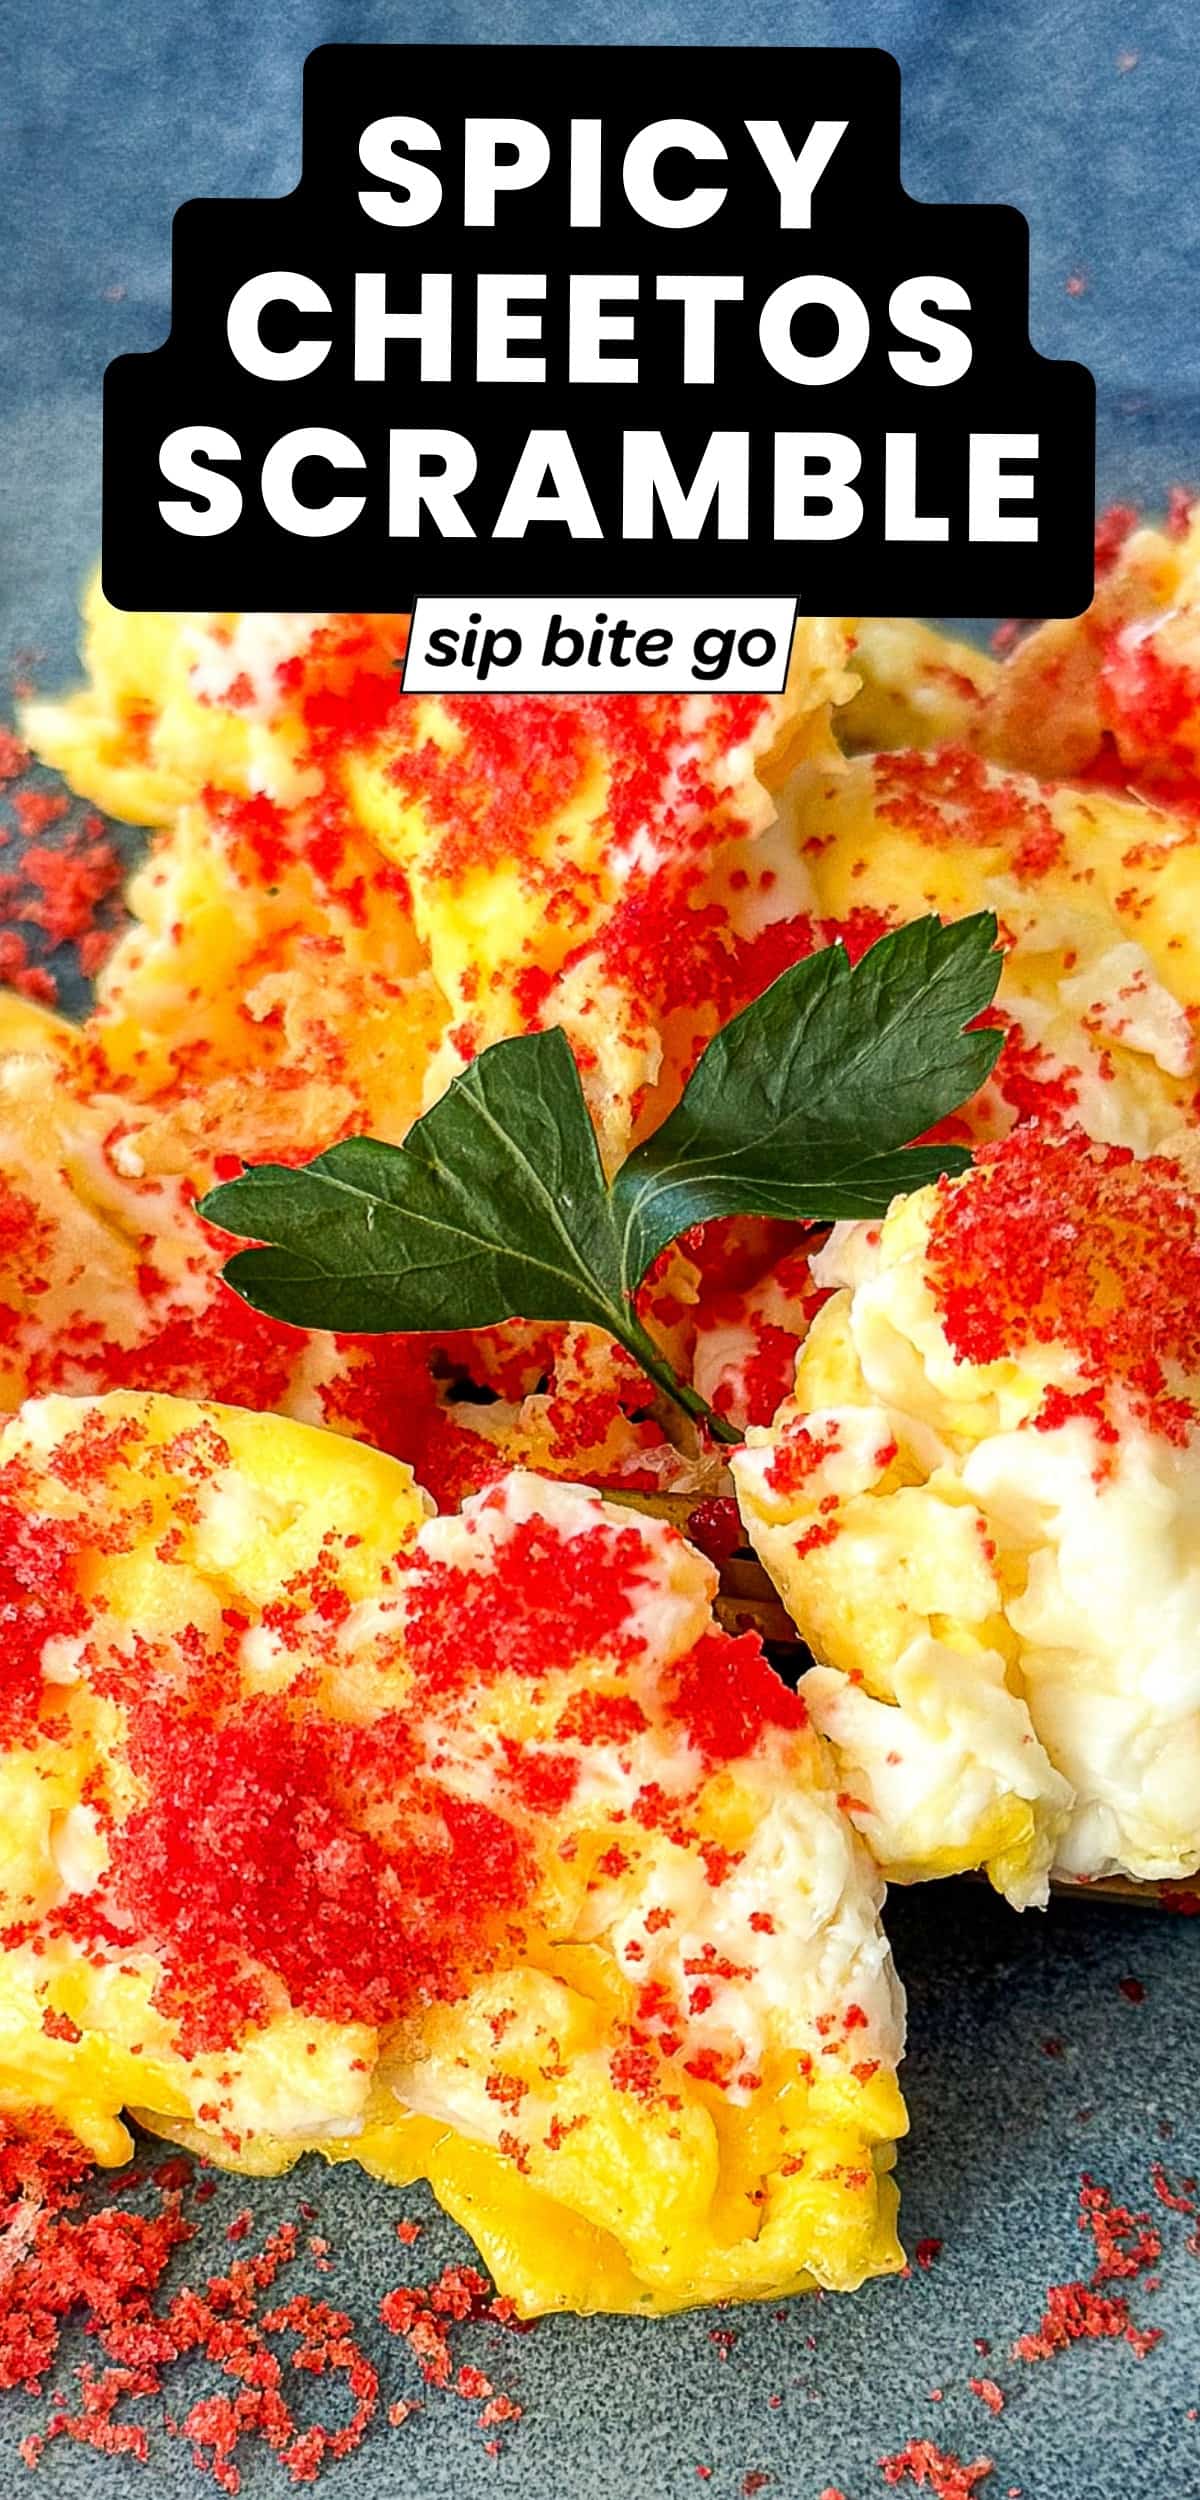 Spicy Flaming Hot Cheetos Recipe with Scrambled Eggs with text overlay